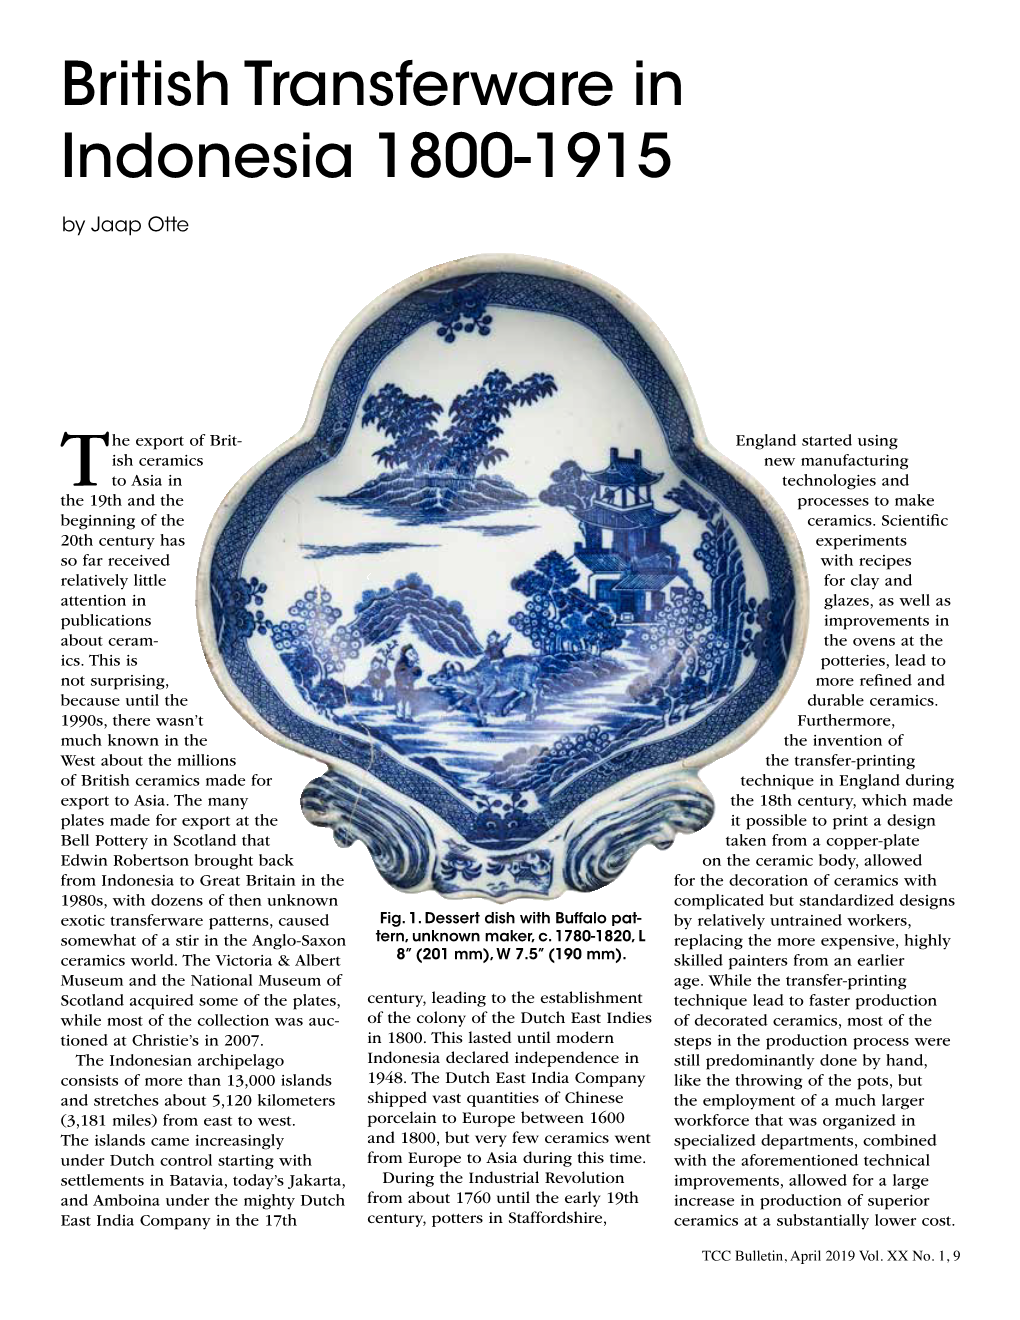 British Transferware in Indonesia 1800-1915 by Jaap Otte